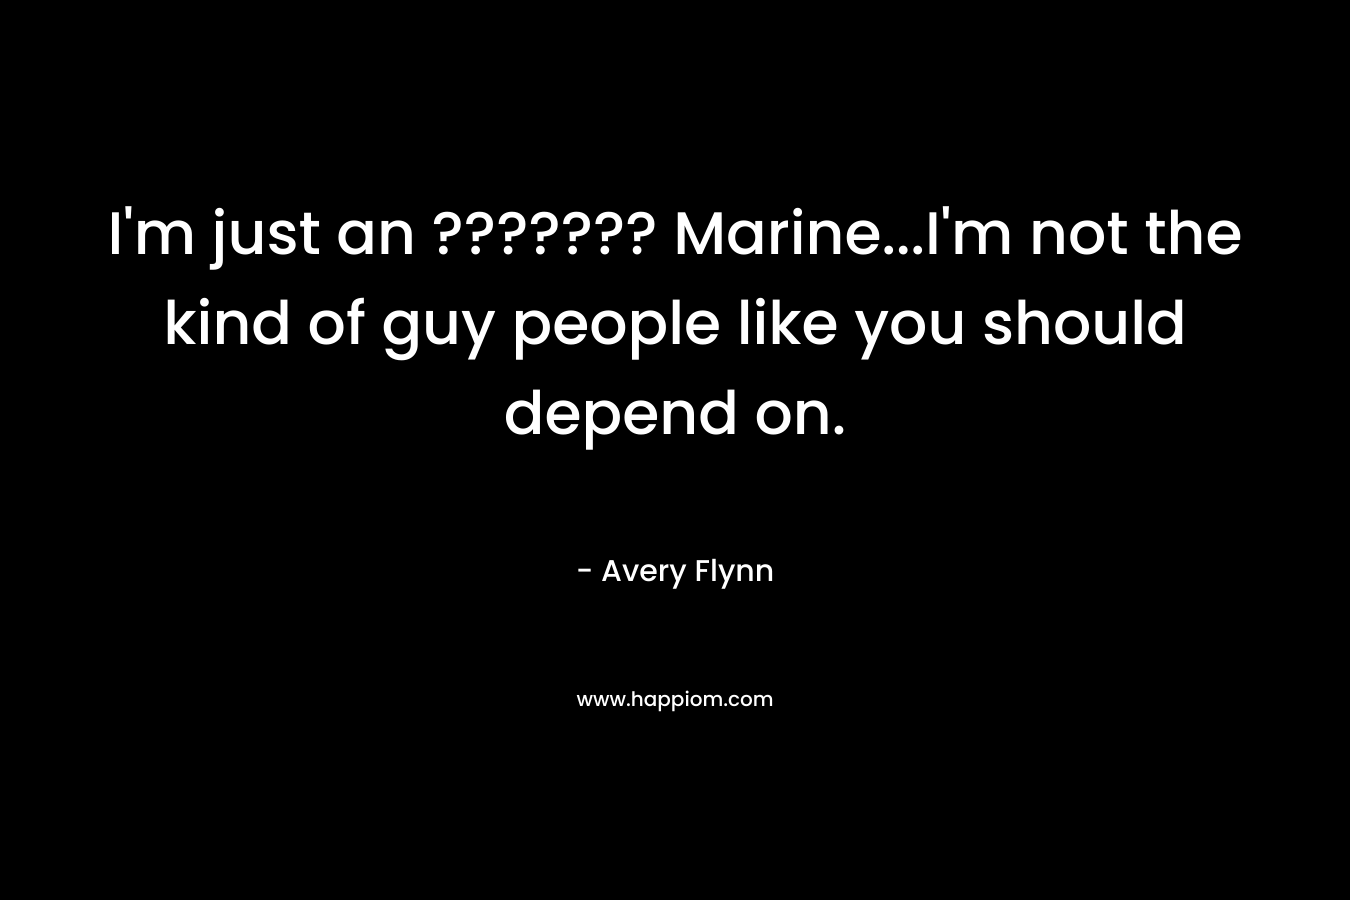 I'm just an ??????? Marine...I'm not the kind of guy people like you should depend on.